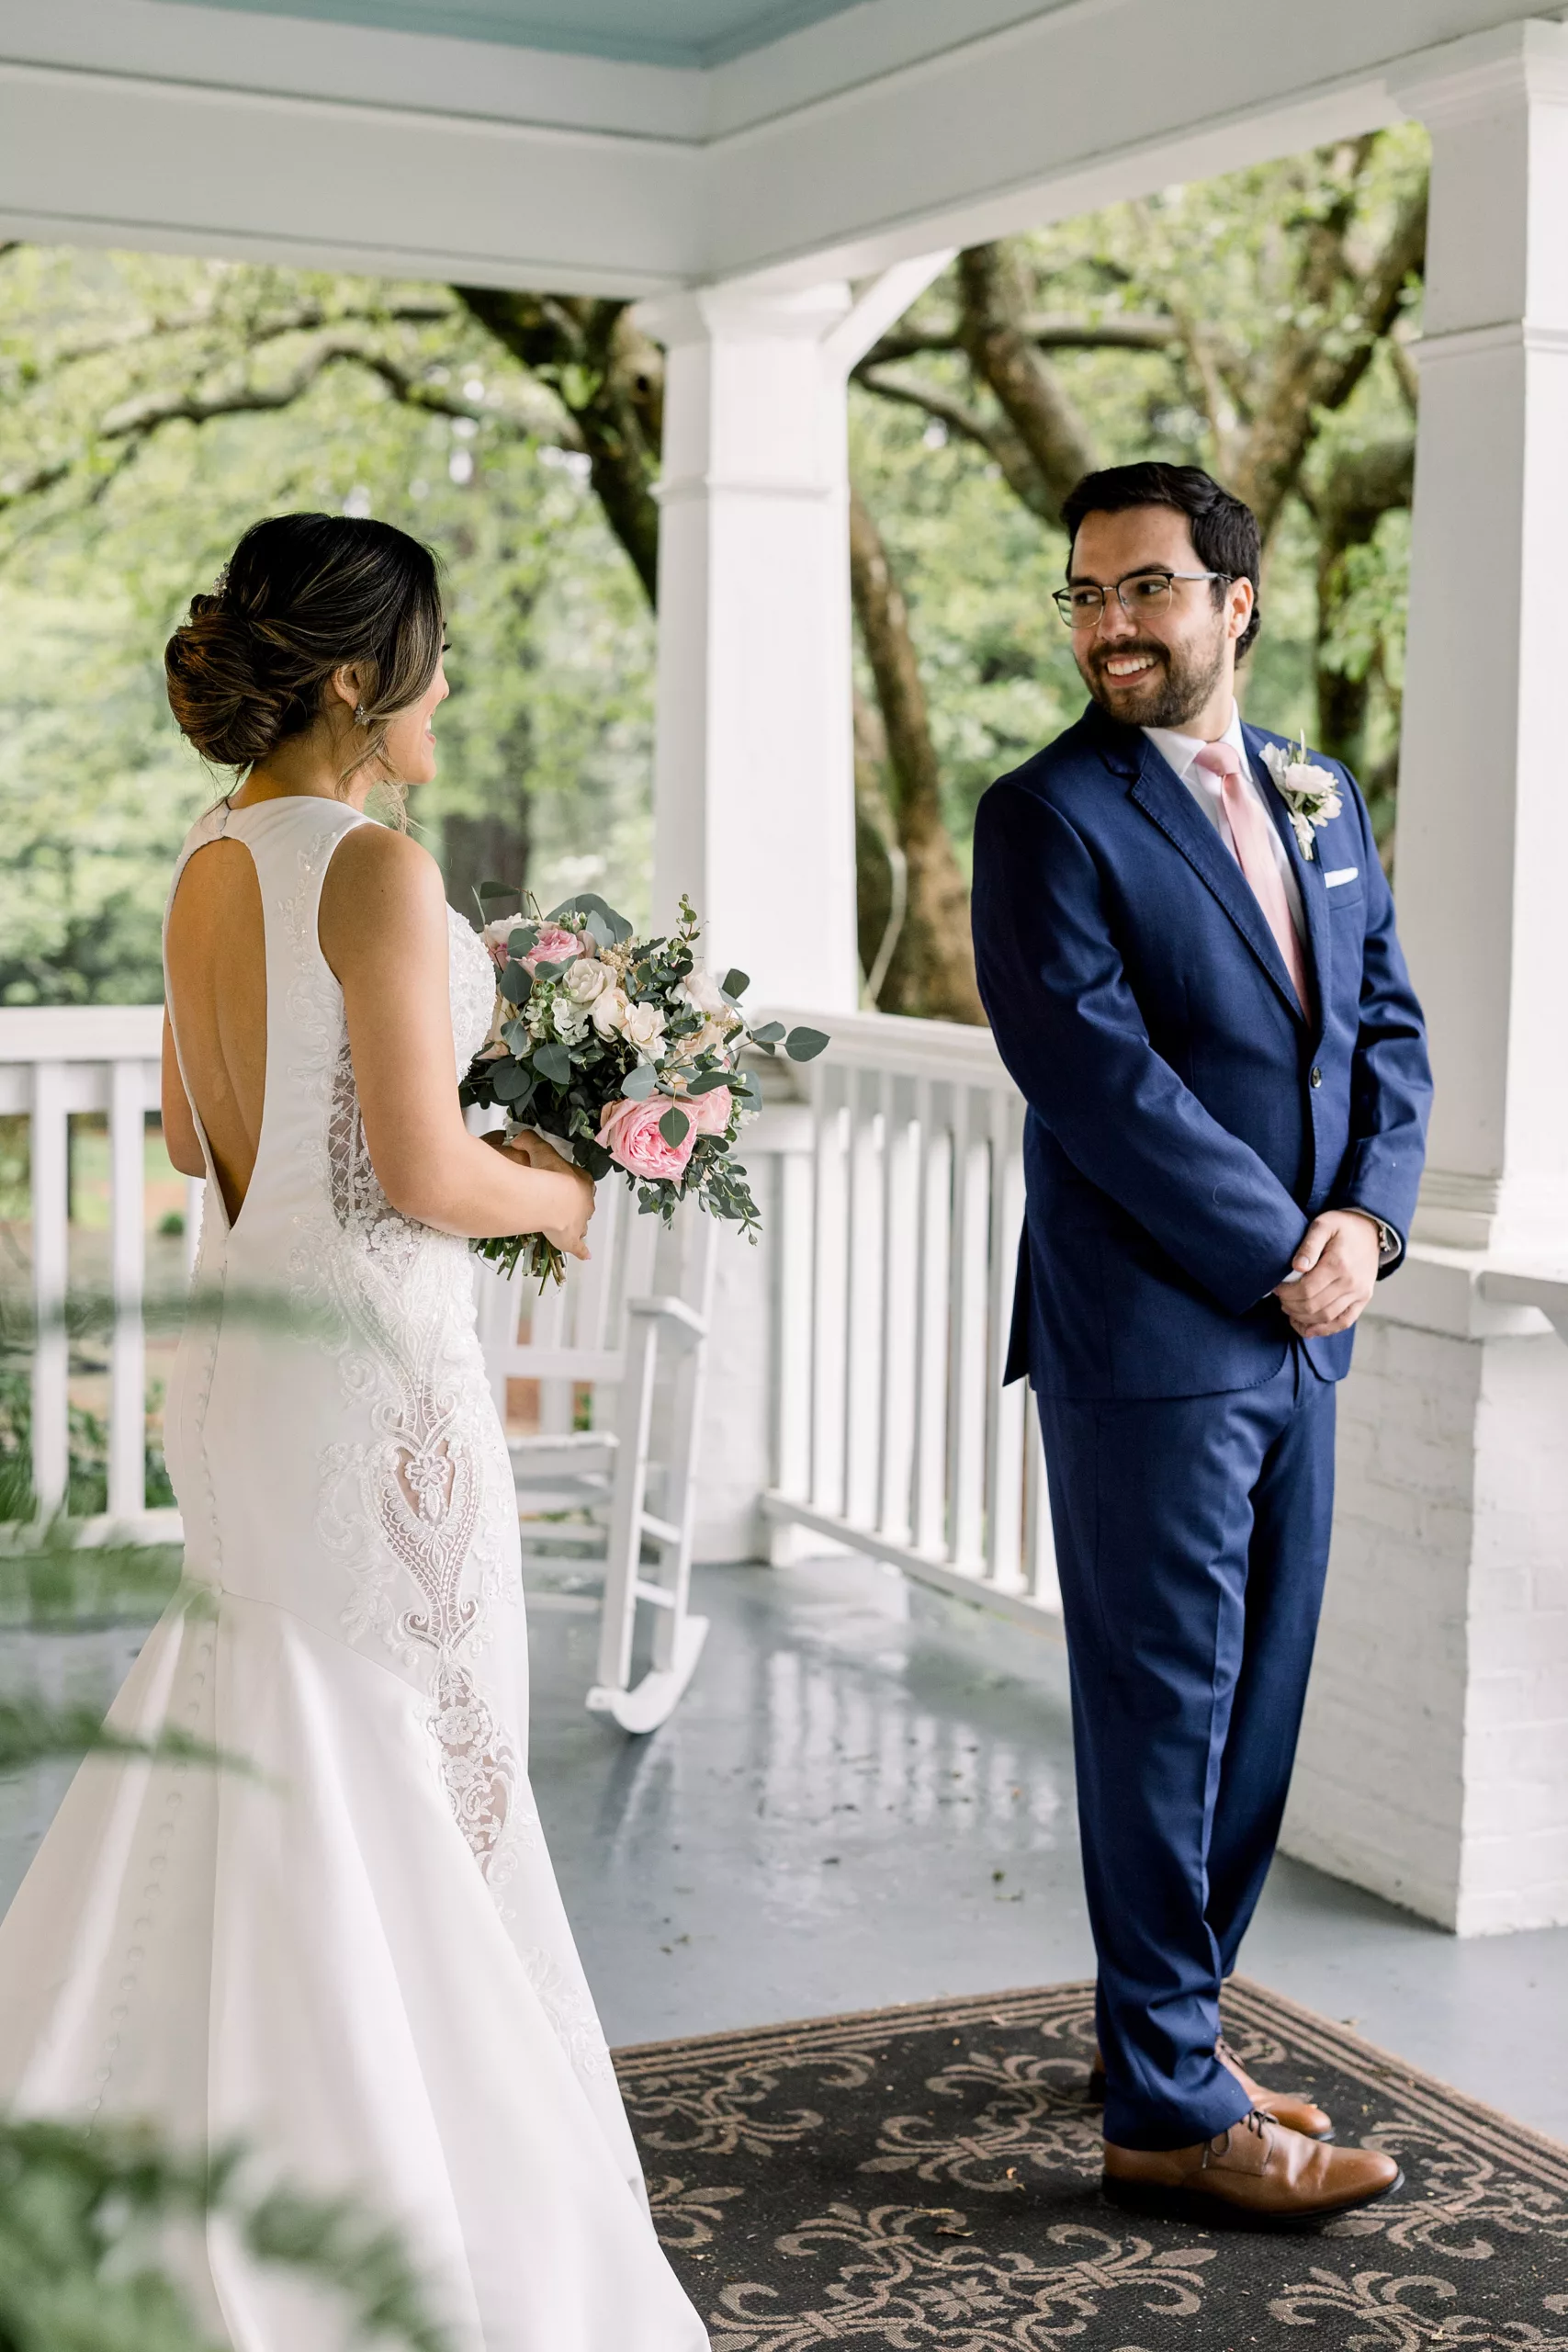 A groom turns around to see his bride standing behind him in her dress for the first time during their first look wedding